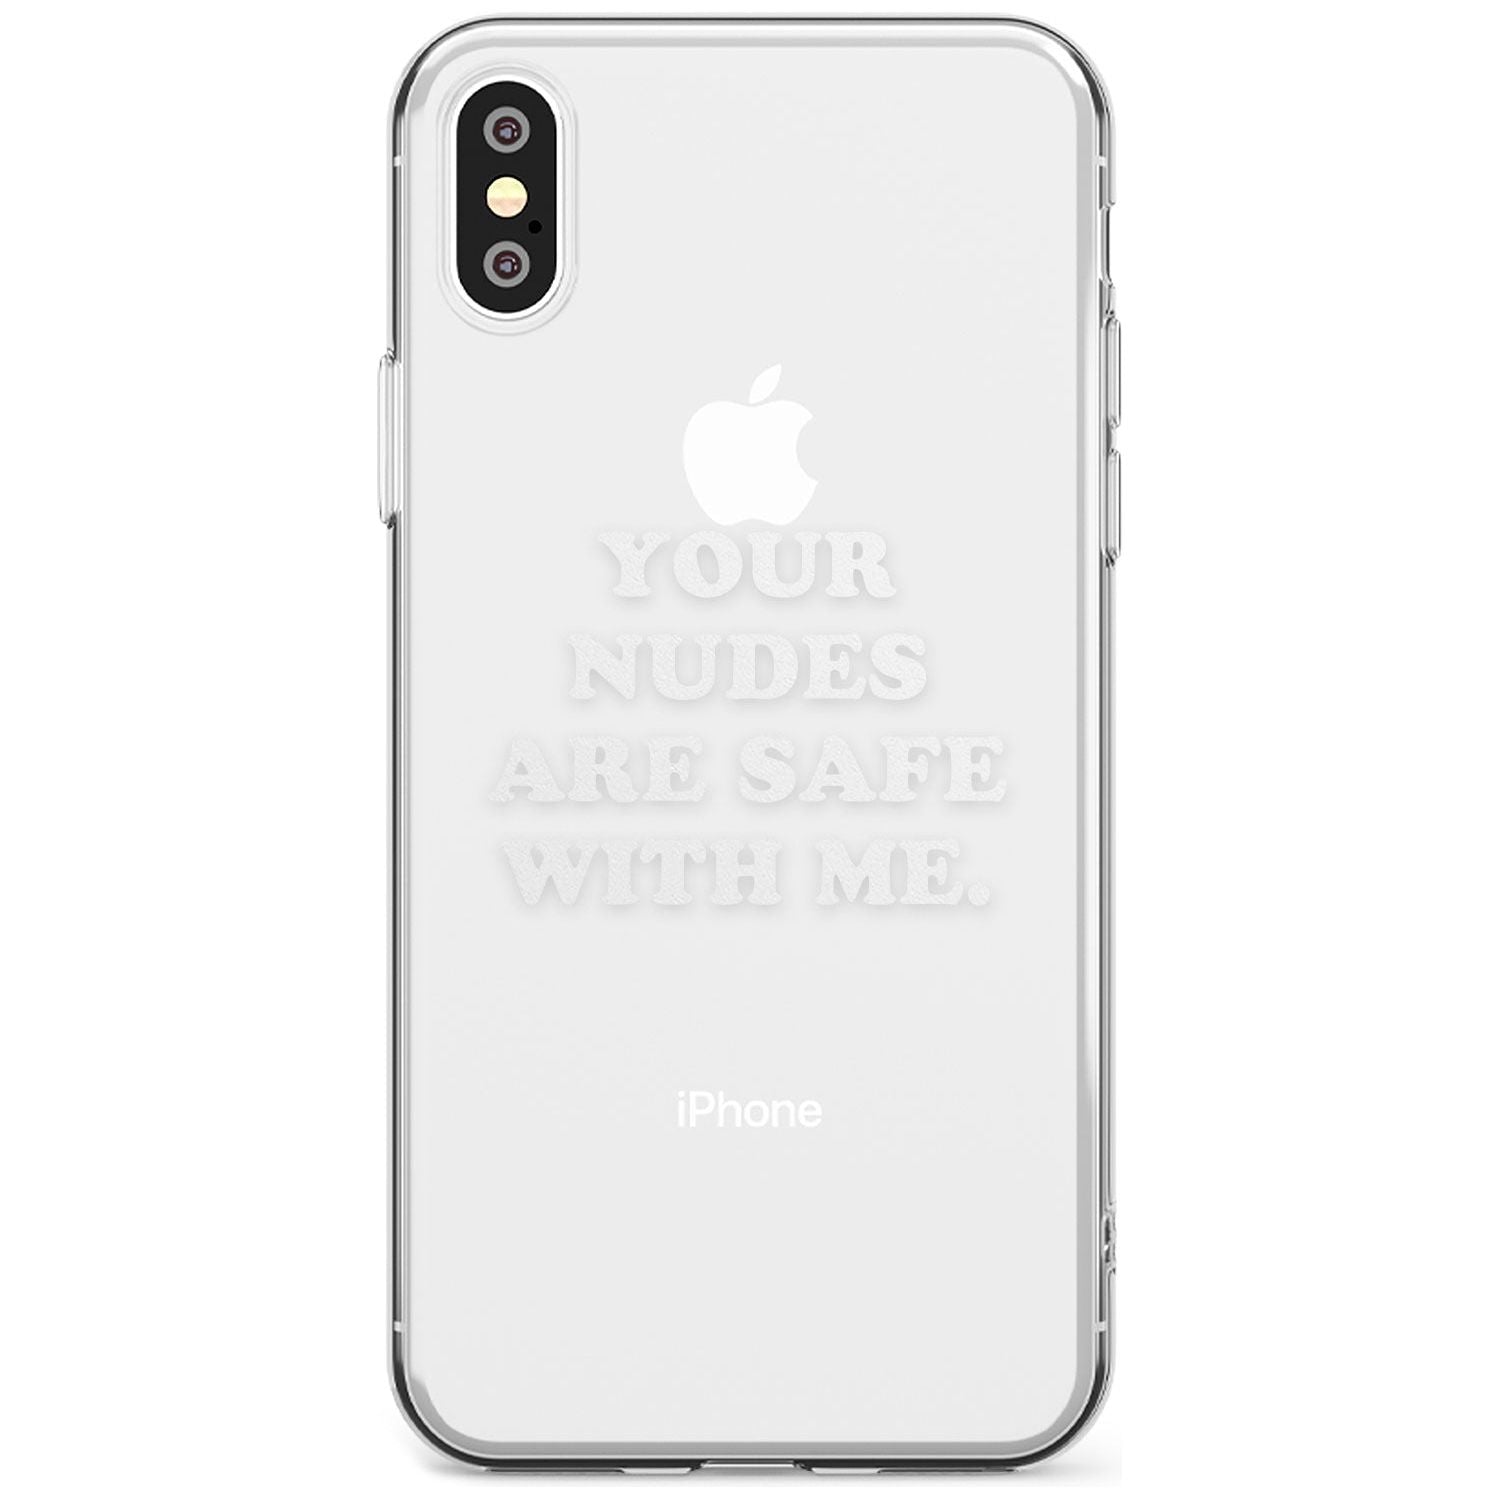 Your nudes are safe with me... WHITE Slim TPU Phone Case Warehouse X XS Max XR